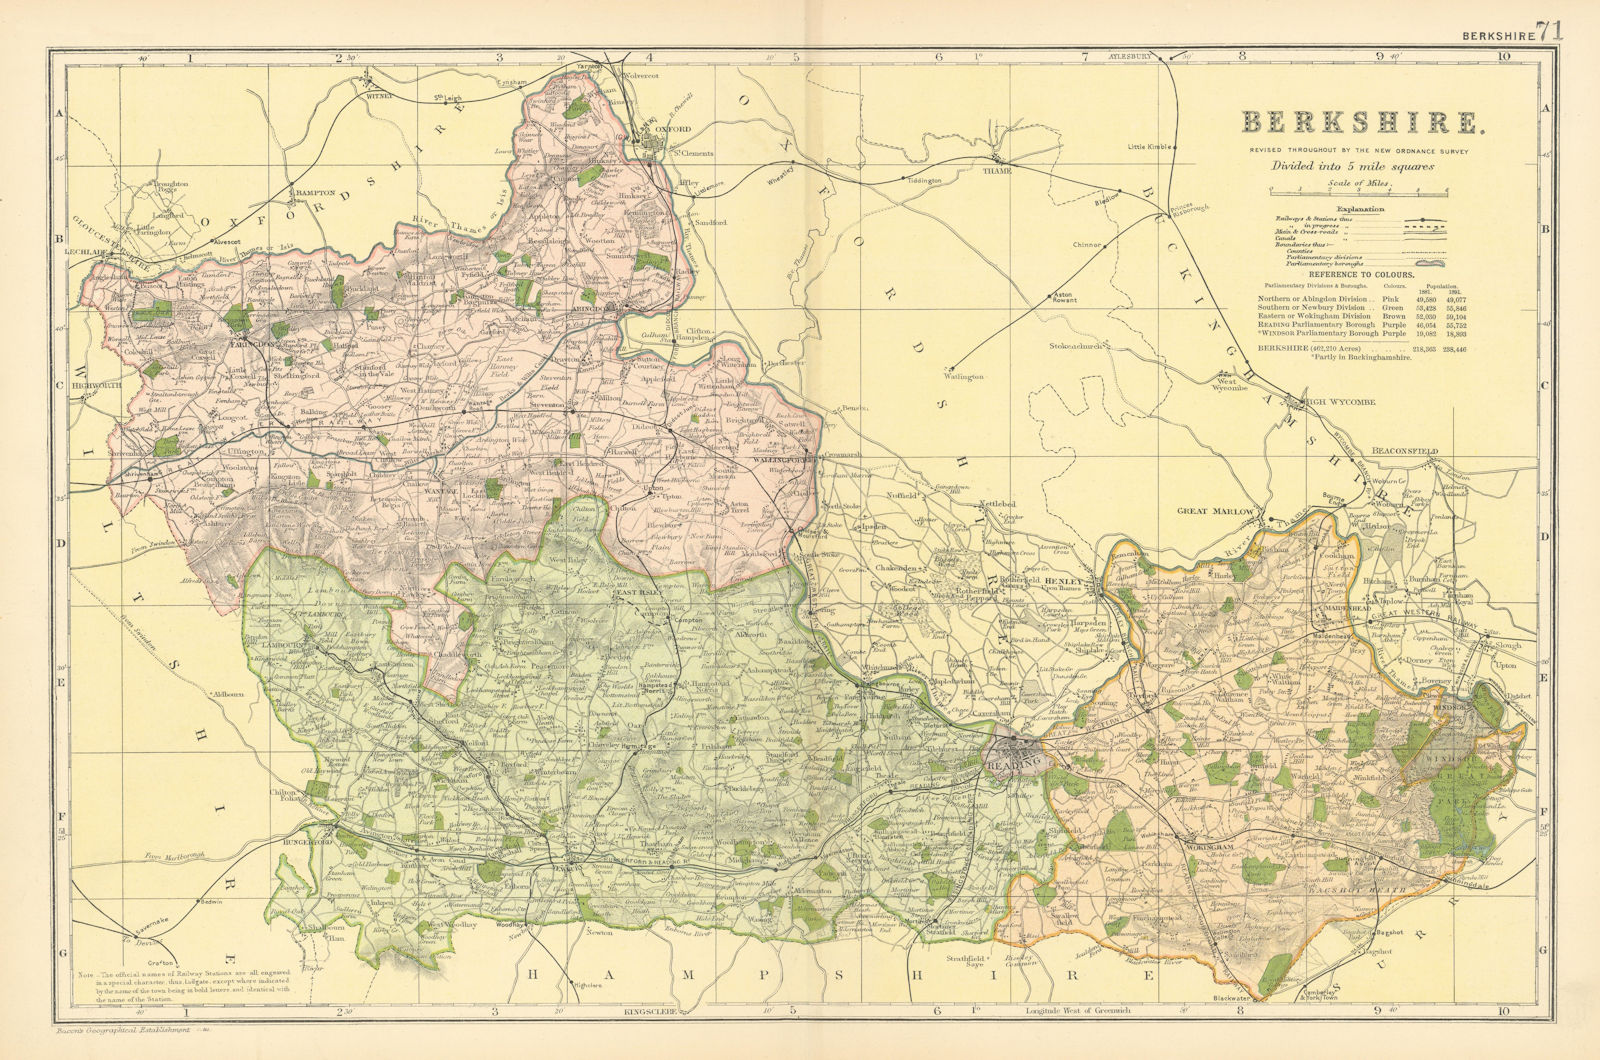 BERKSHIRE county map.Parliamentary constituencies divisions.Railways.BACON 1900